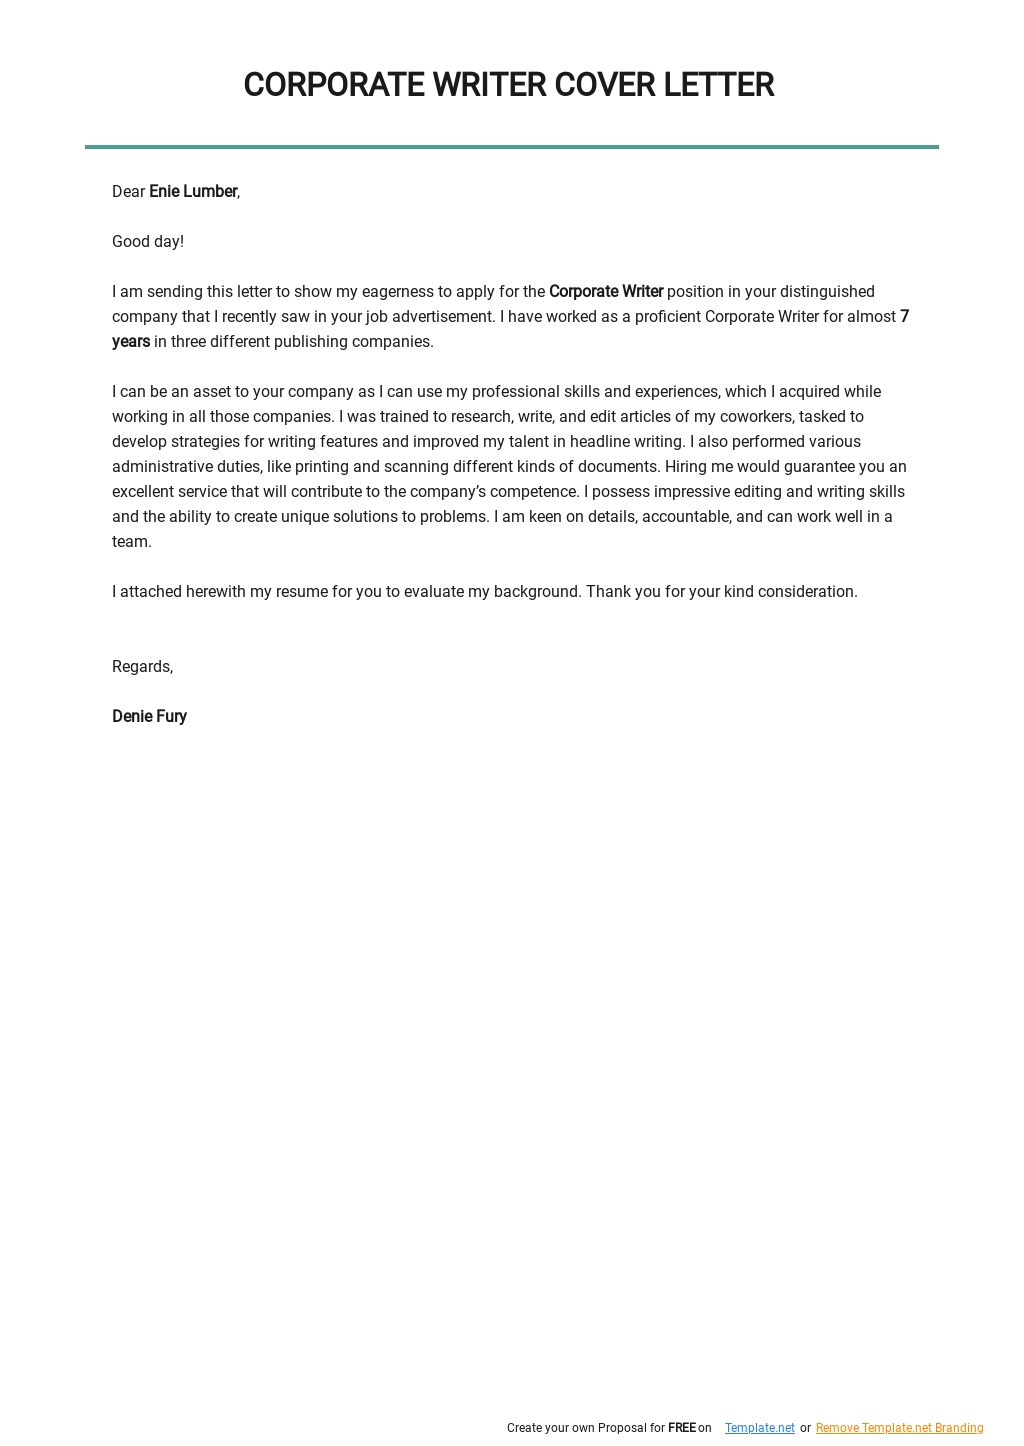 Corporate Writer Cover Letter Template.jpe